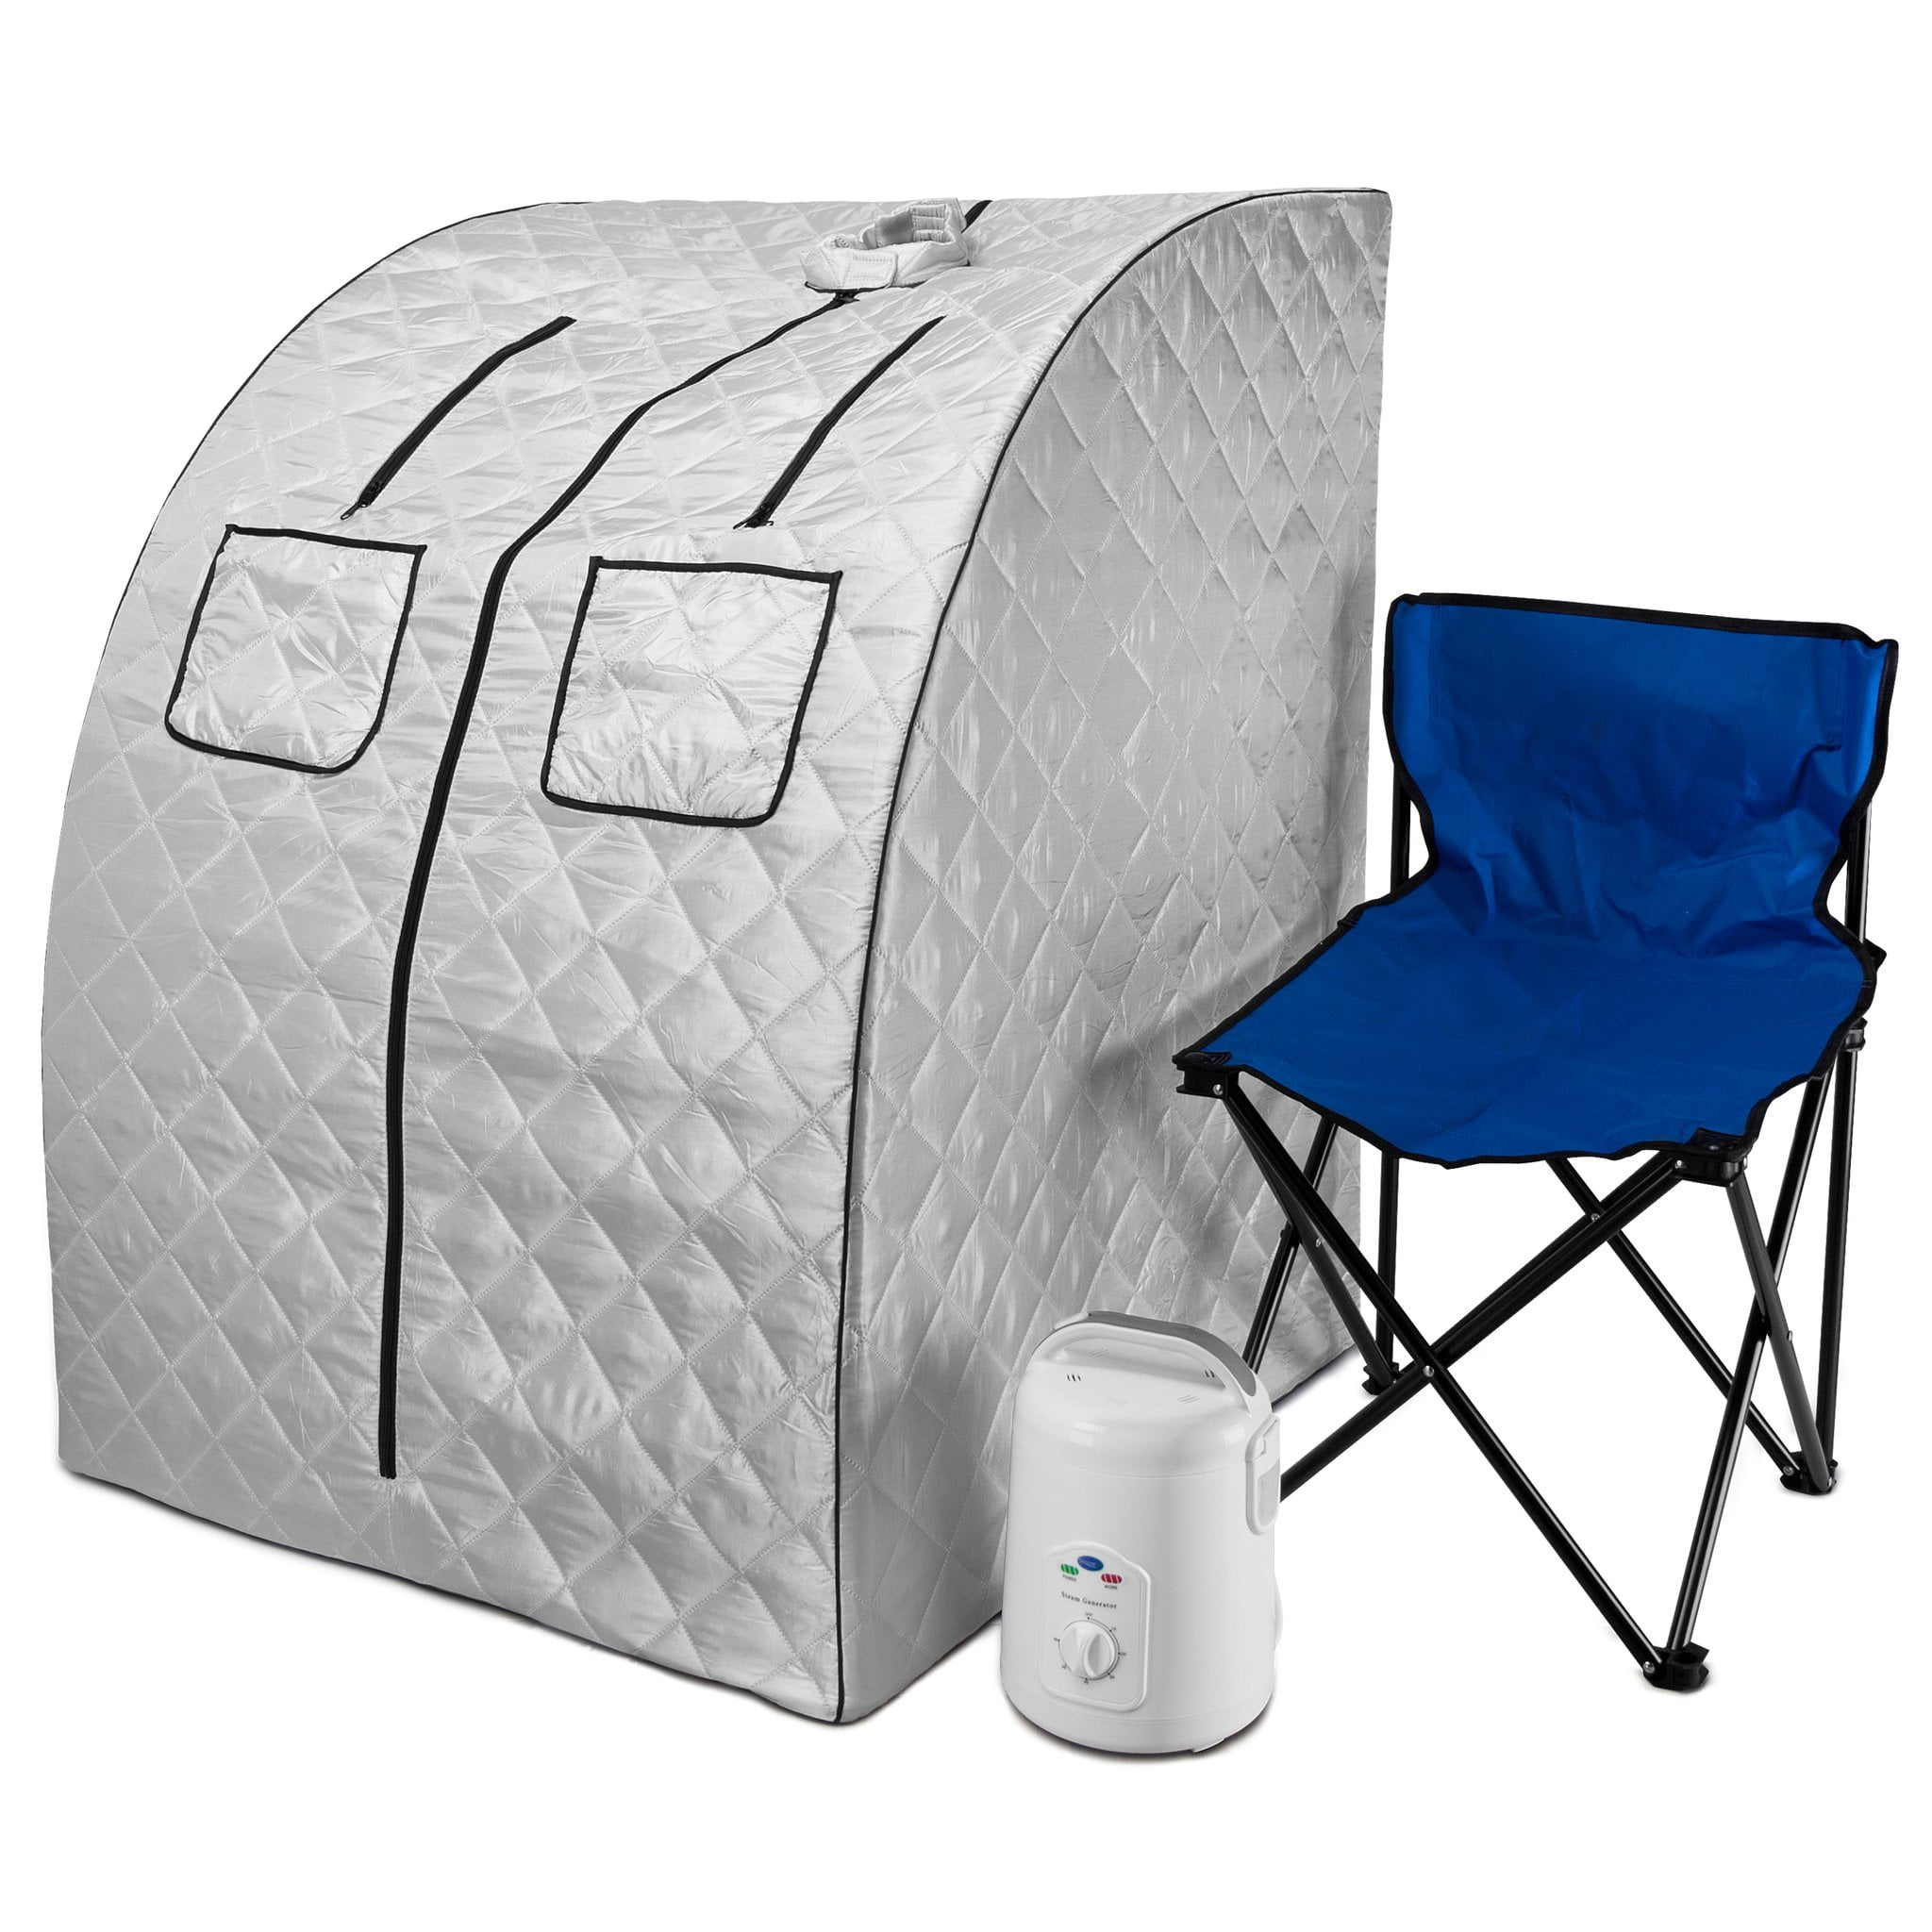 Pink/Gray Relaxation at Home Detox Durasage Lightweight Portable Personal Steam Sauna Spa for Weight Loss 60 Minute Timer 